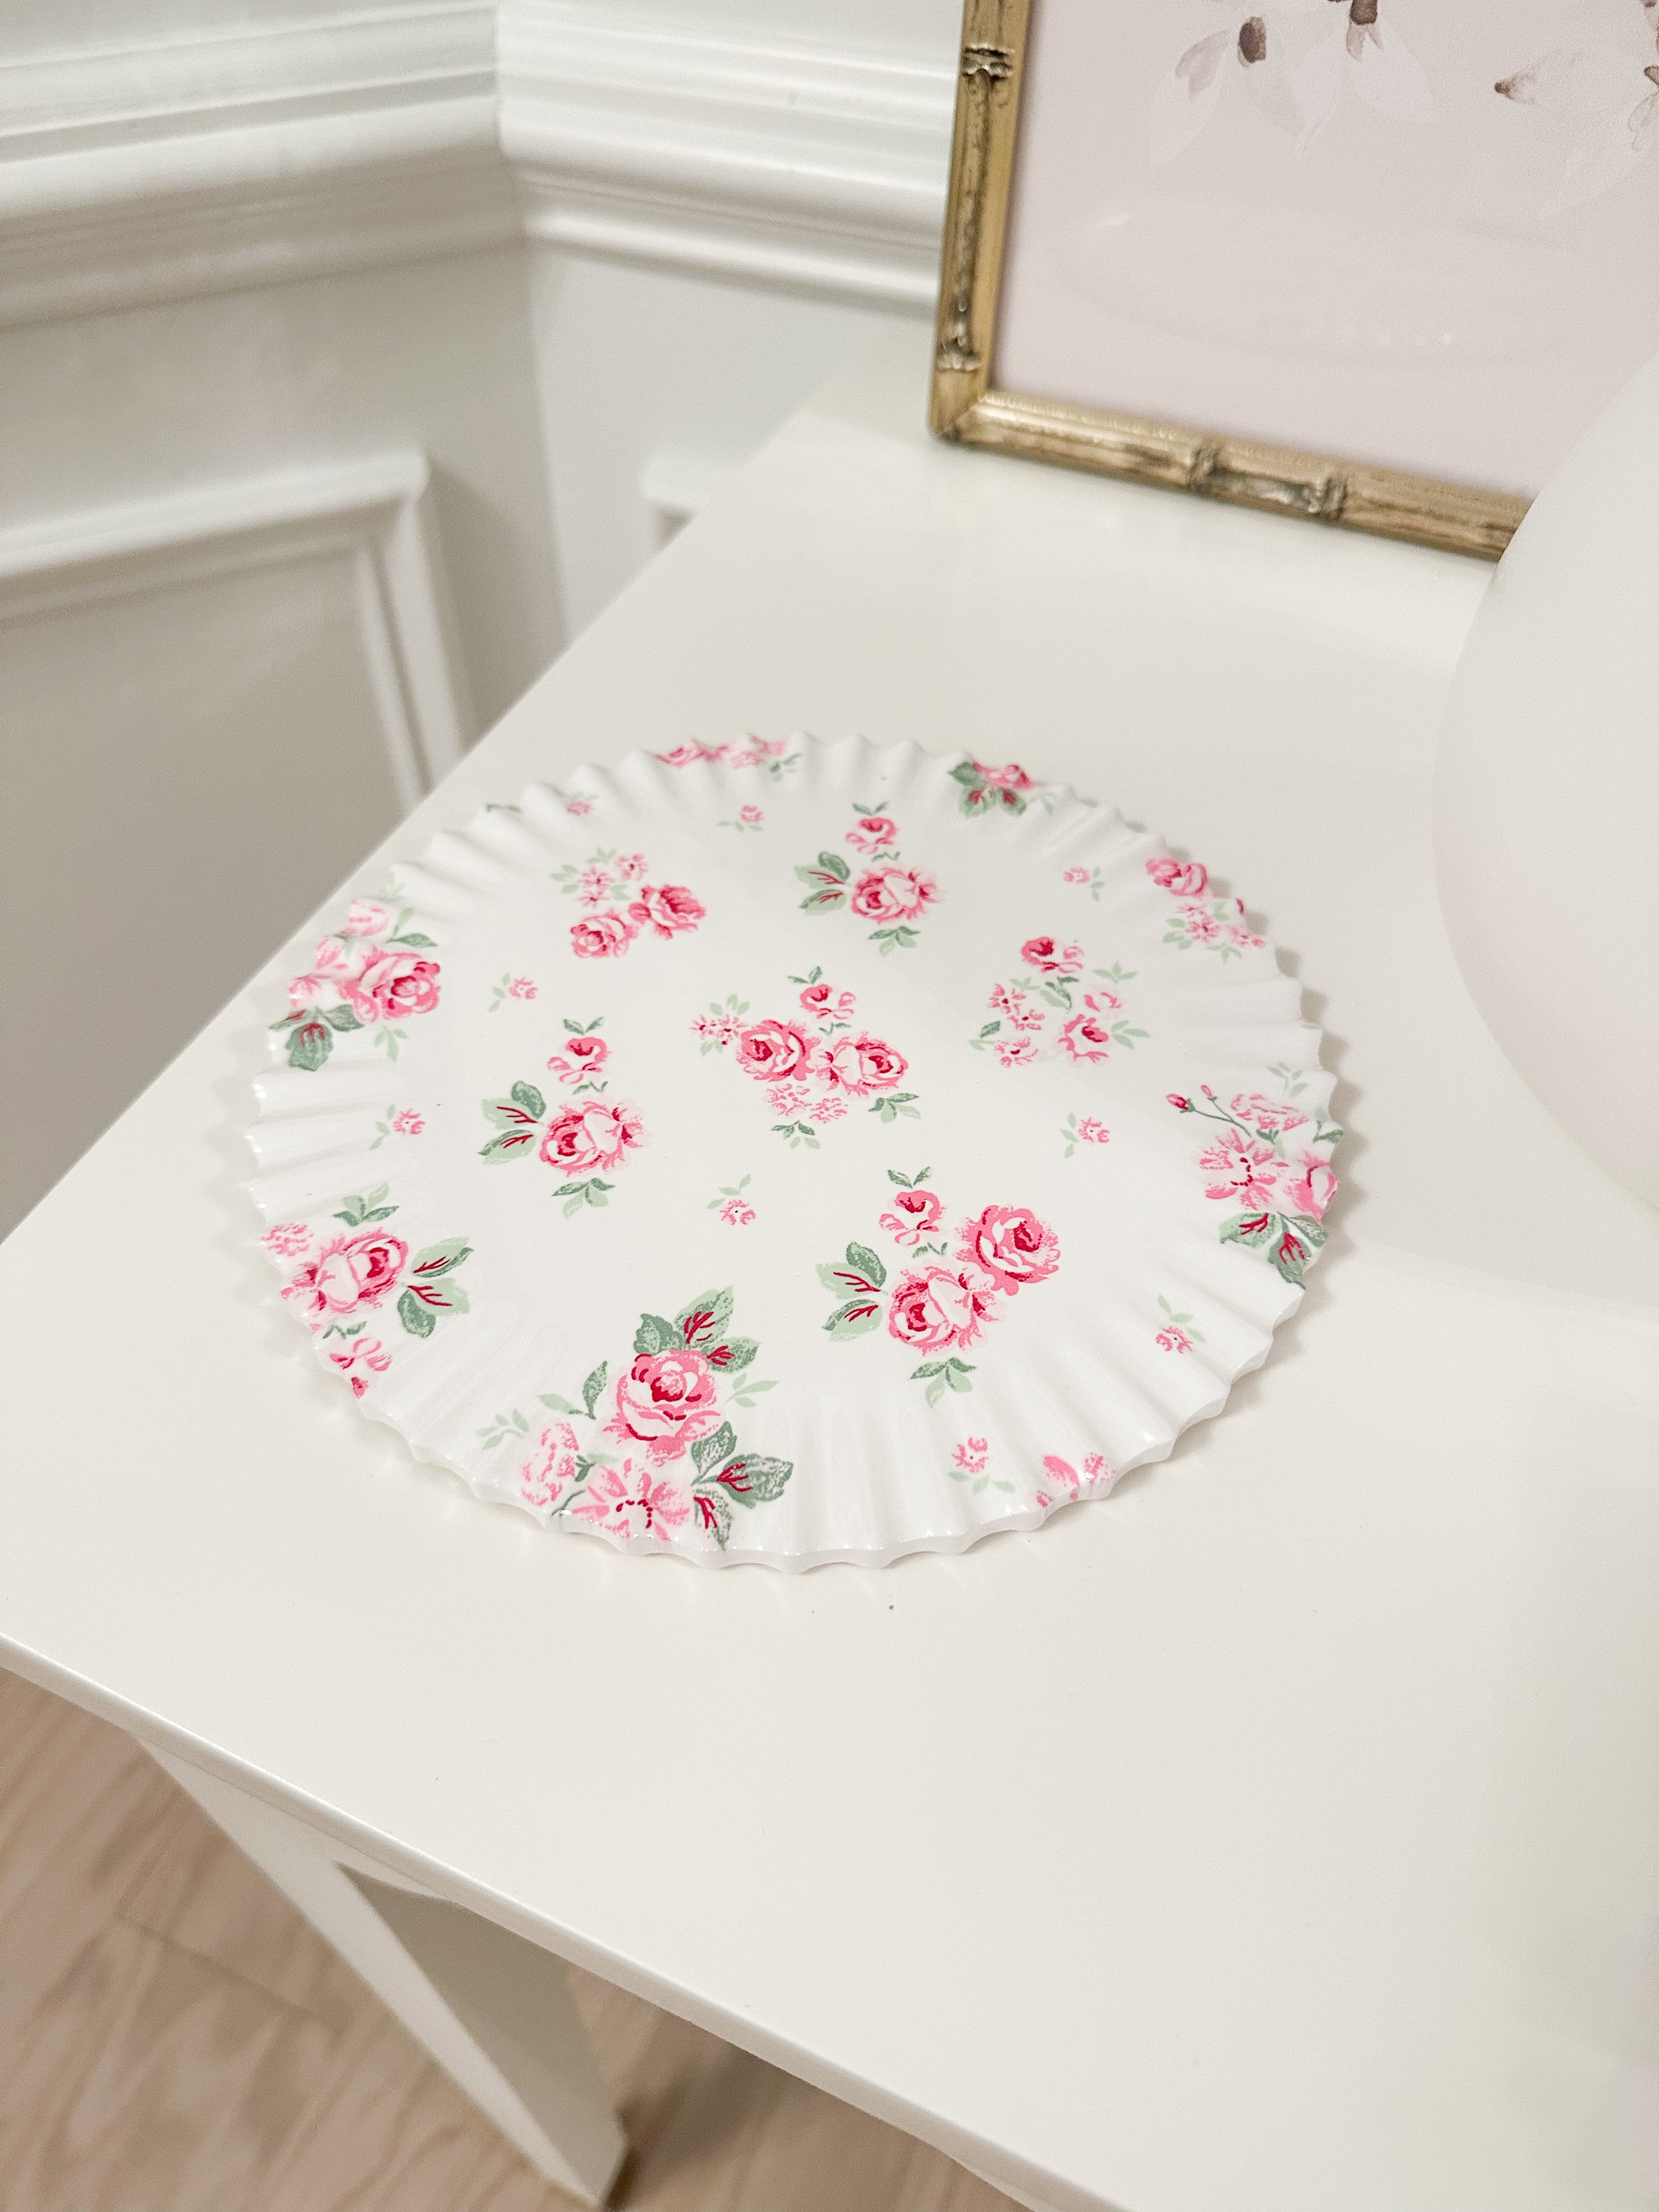 Ditsy Floral Oversized Coaster🌸